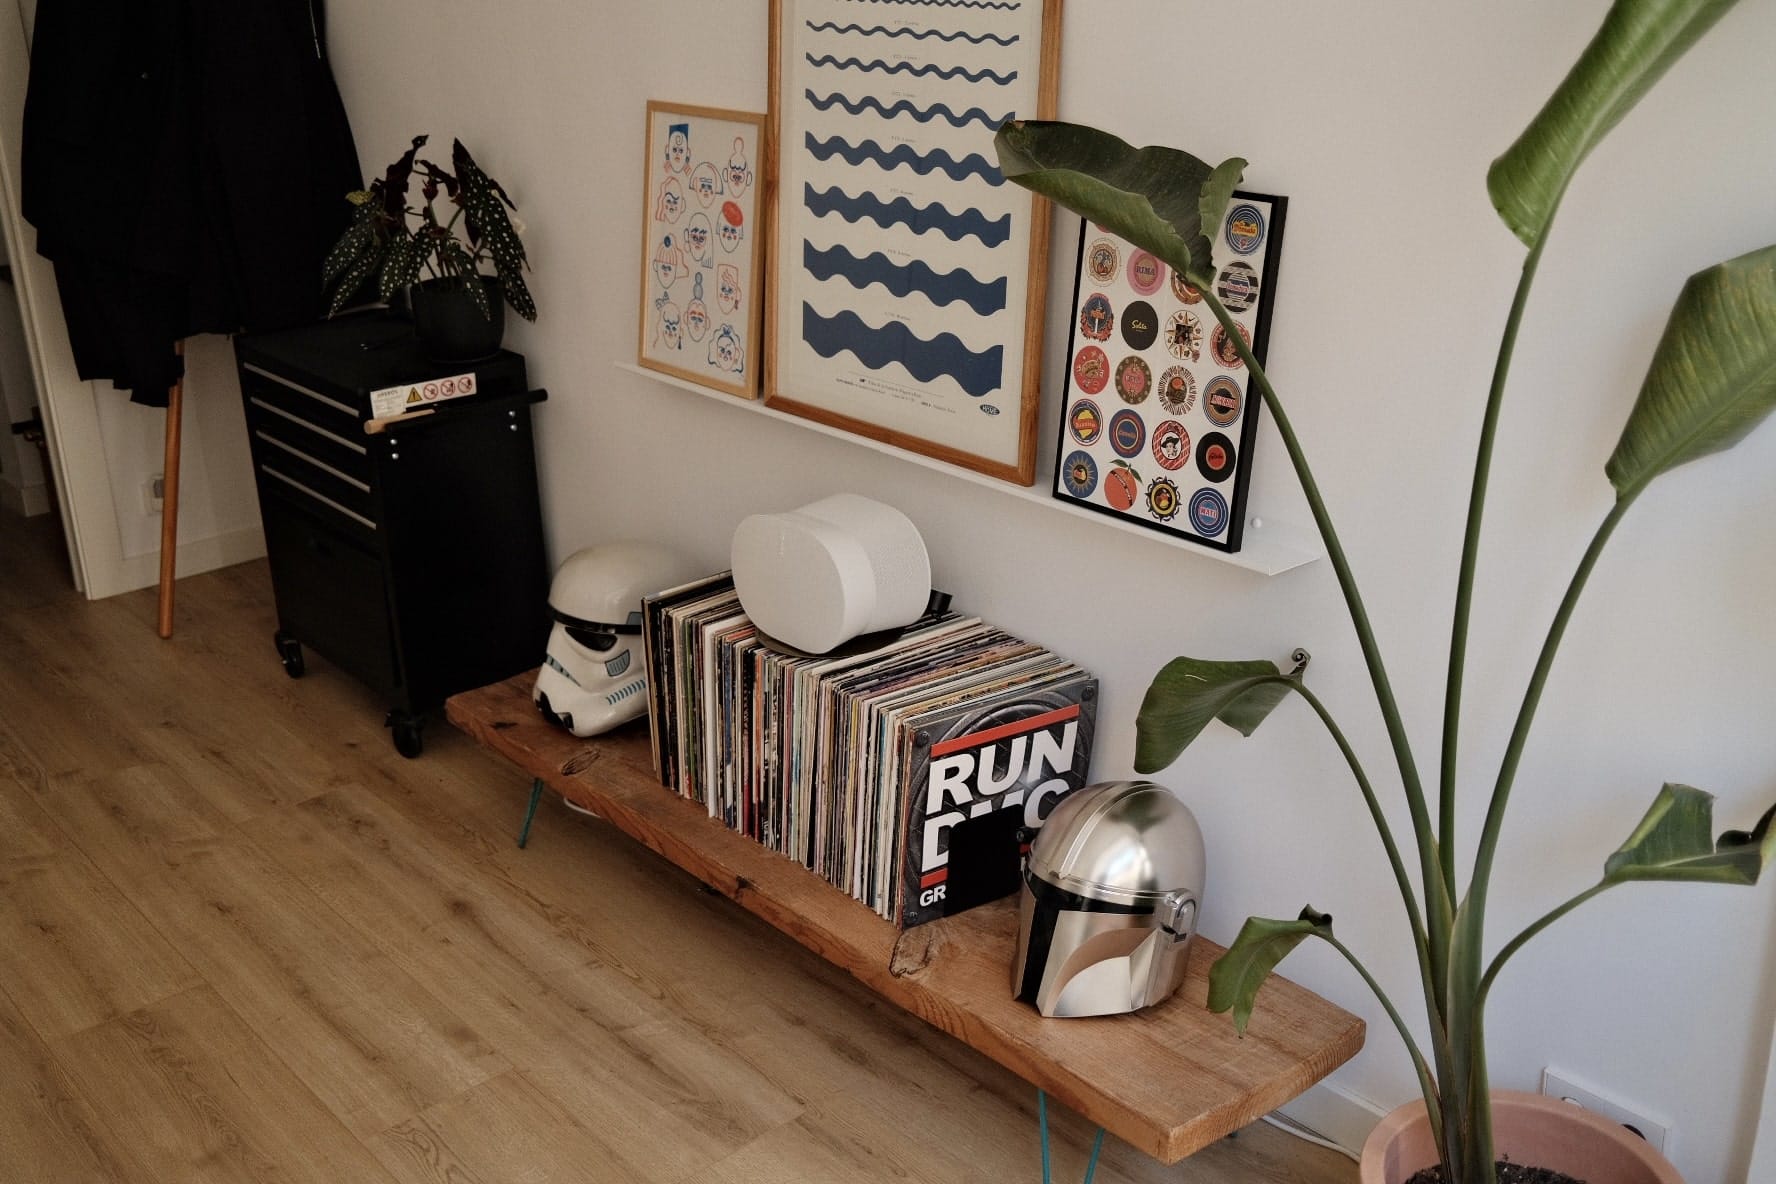 A corner of a room with a collection of vinyl records on a wooden shelf, framed artwork on the wall, a black storage trolley, and a large potted plant